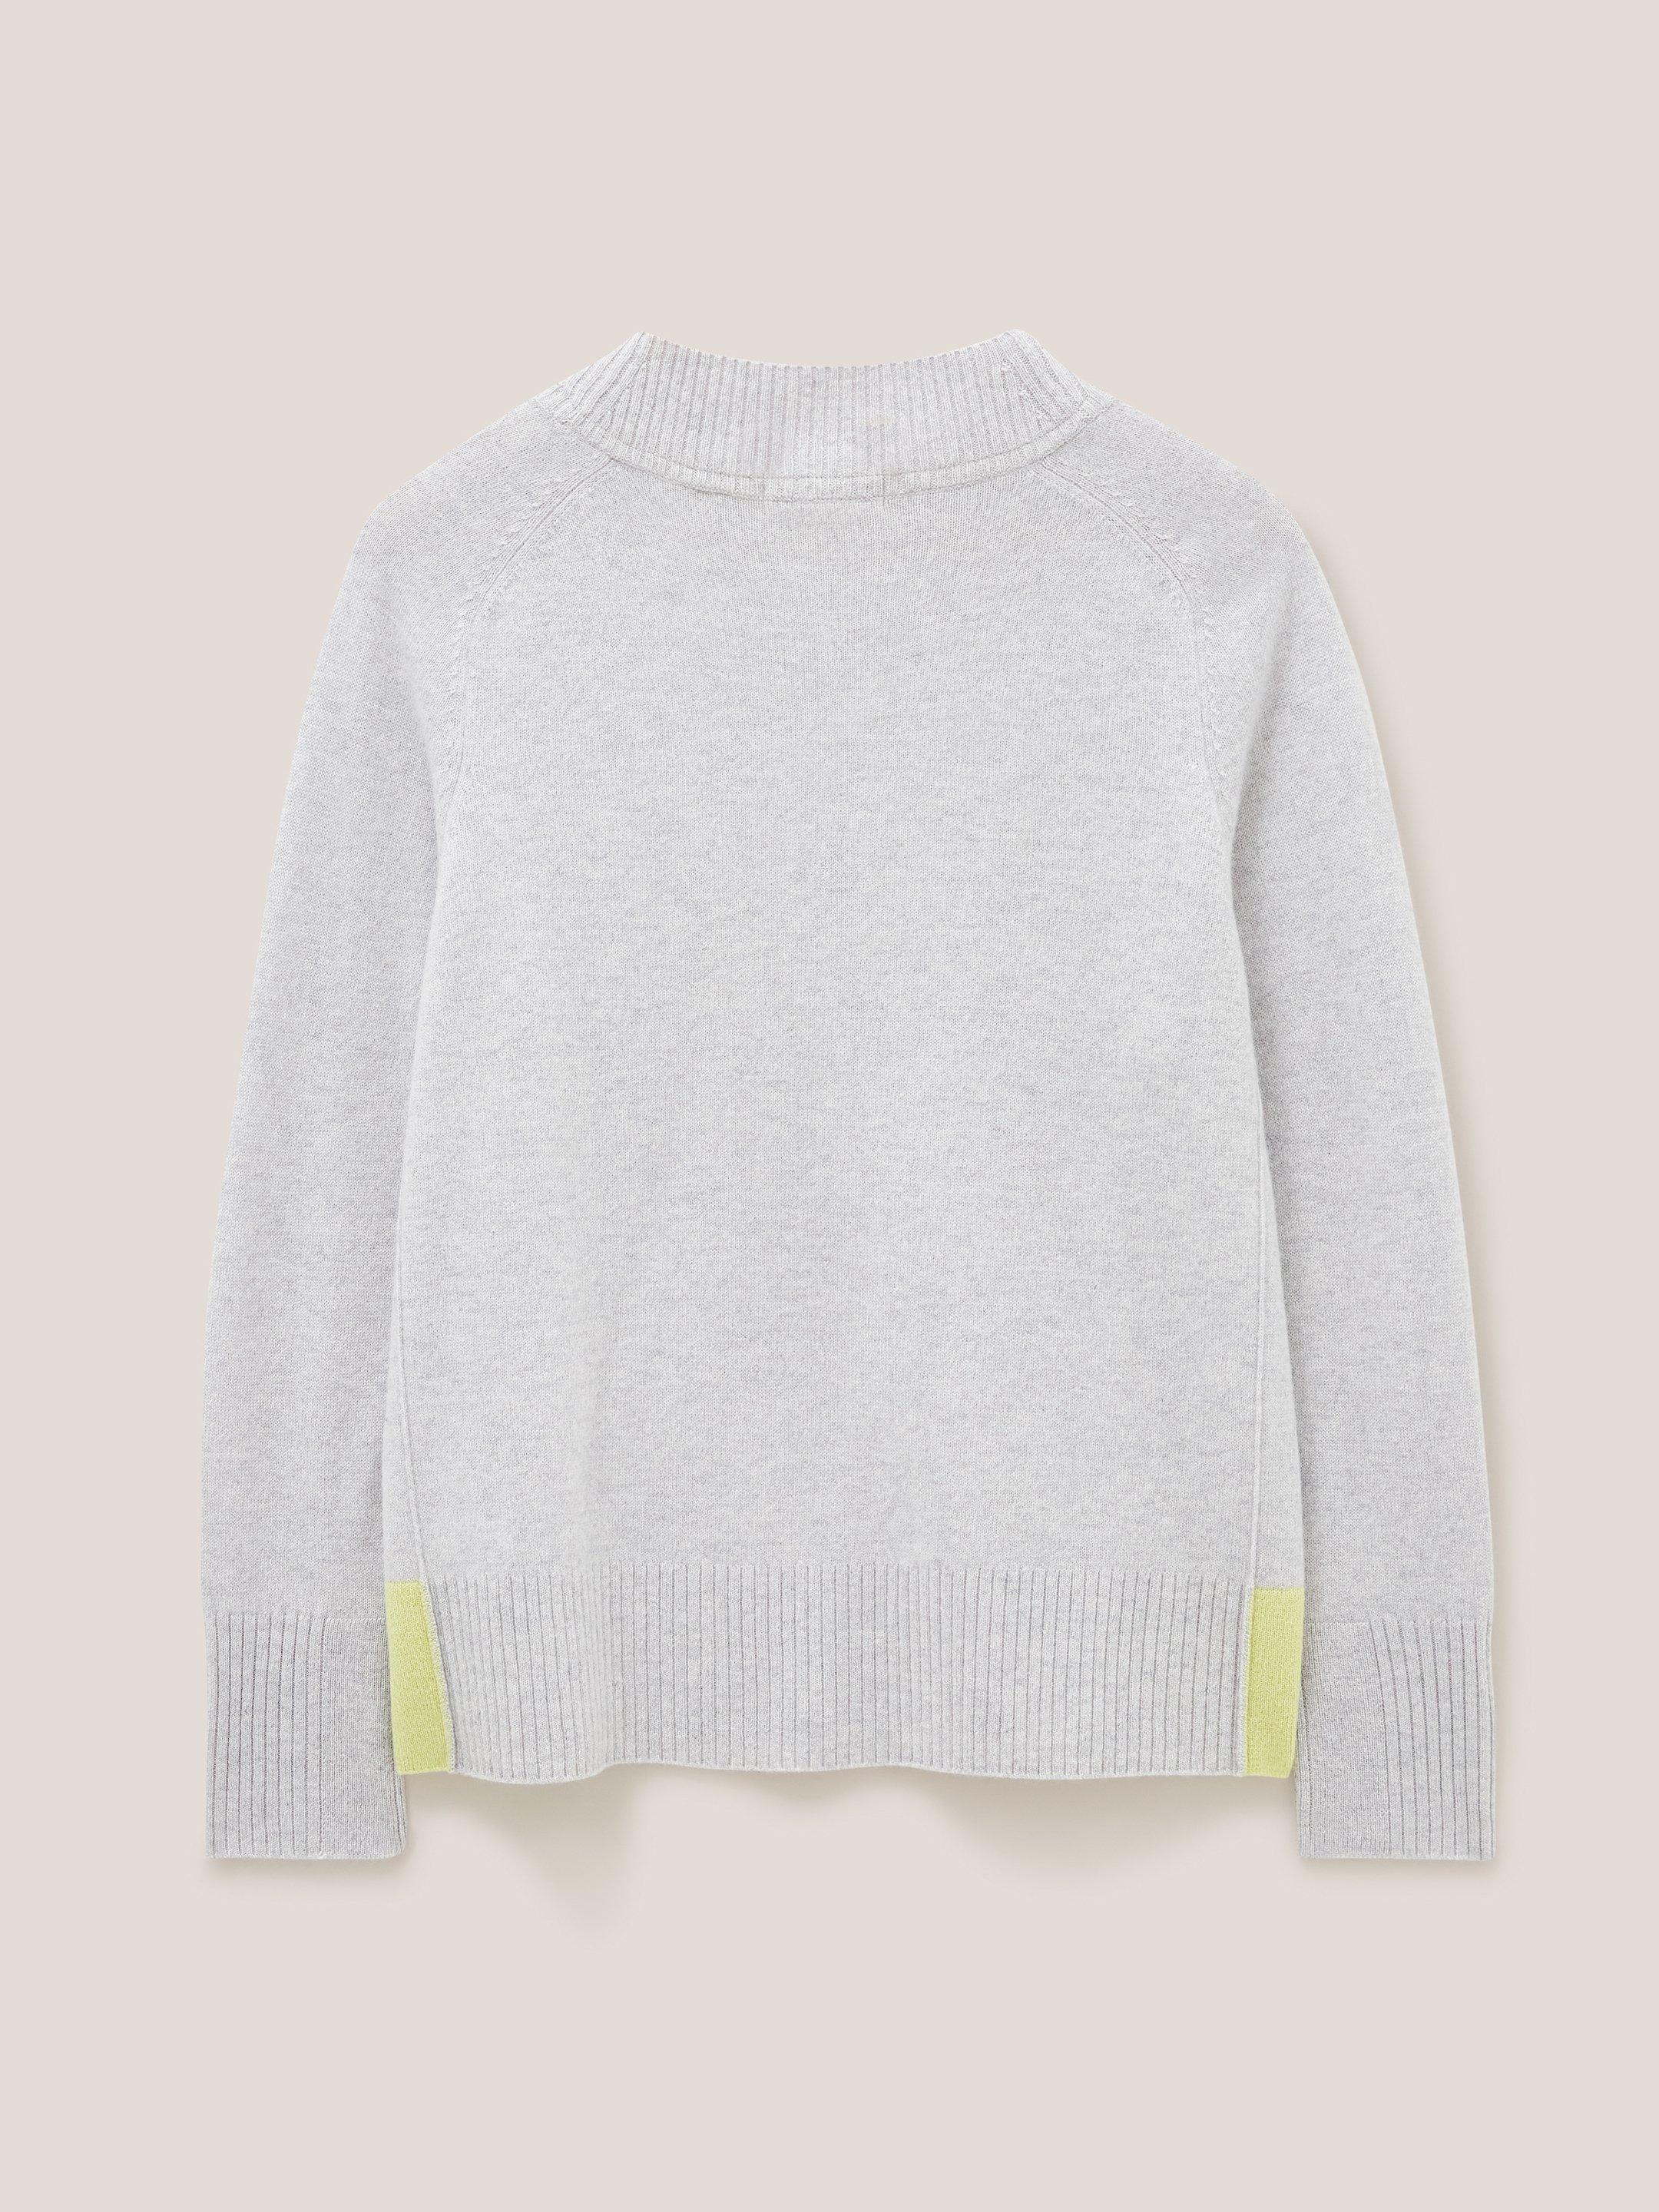 CORA CREW NECK CASHMERE JUMPER in MID GREY - FLAT BACK